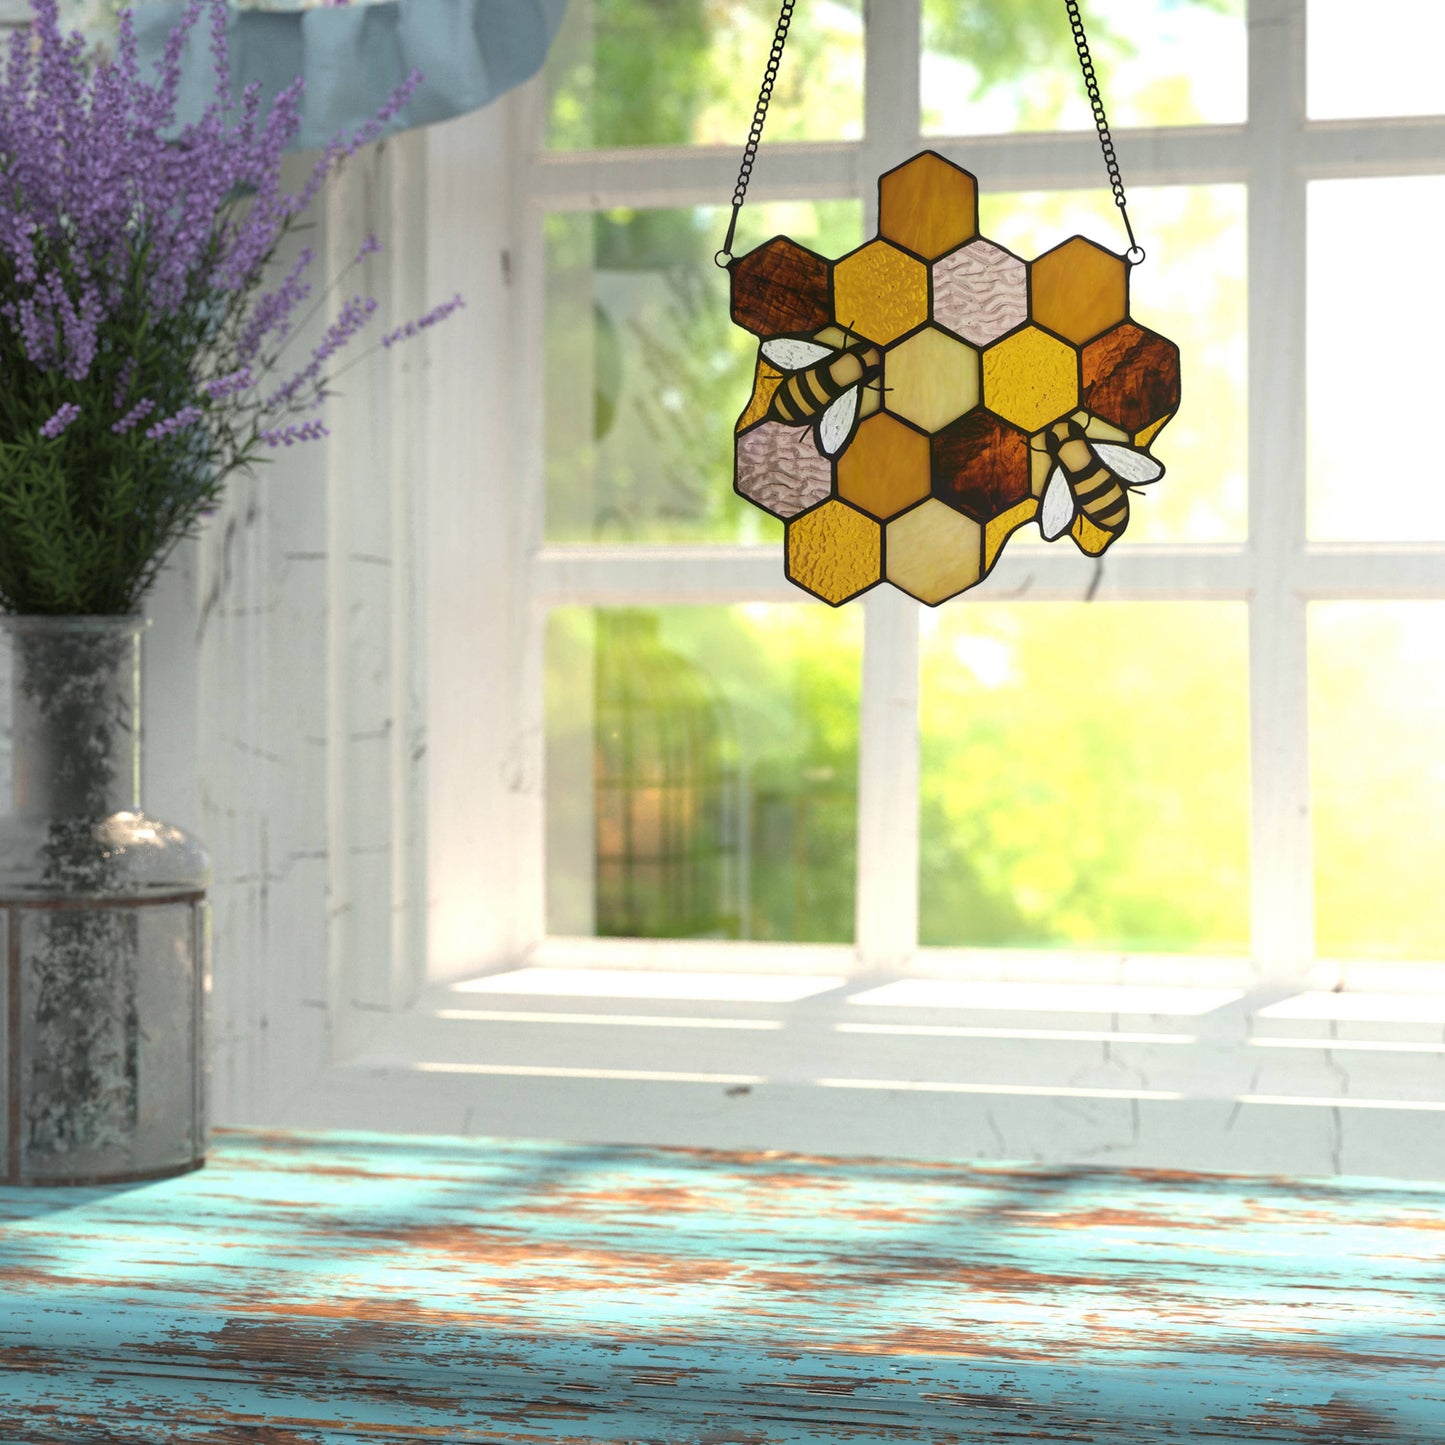 8.25"H Cassie Honeycomb Bees Stained Glass Window Panel